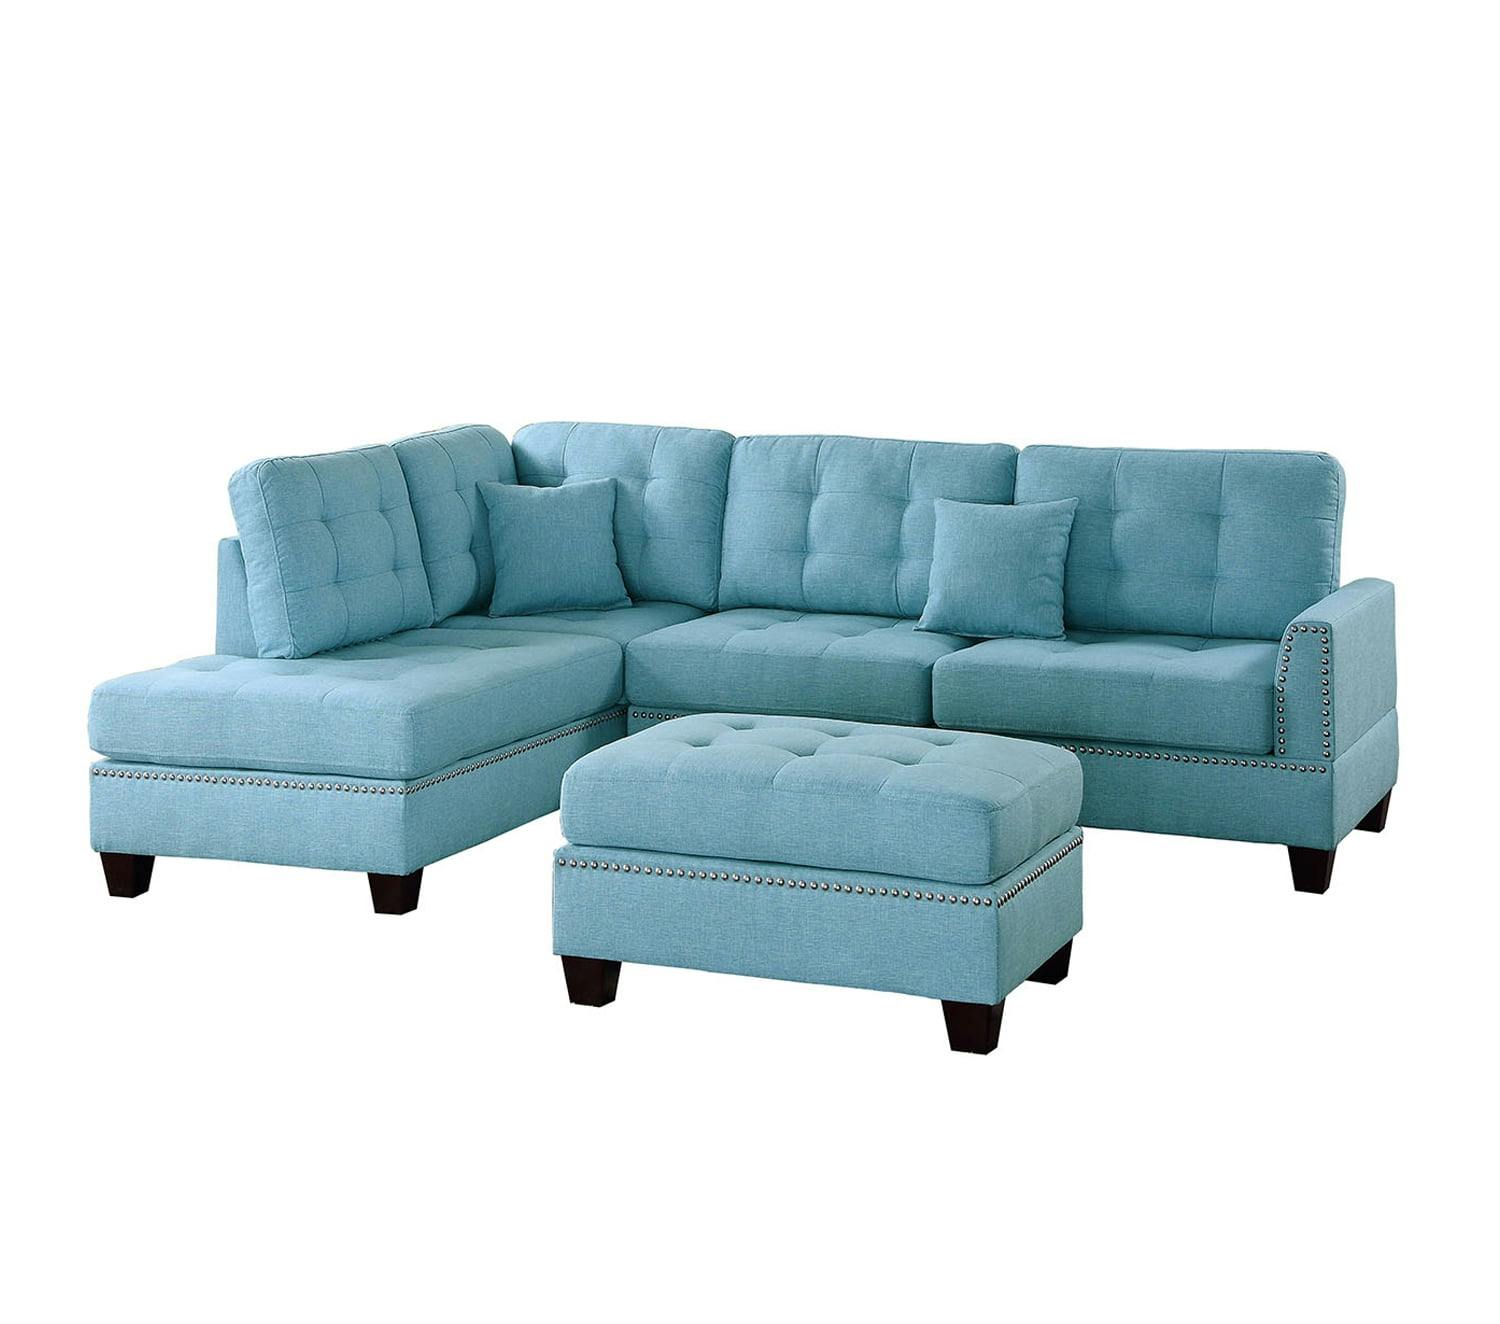 Chic Blue Gray Tufted 3-Piece Sectional Sofa with Ottoman